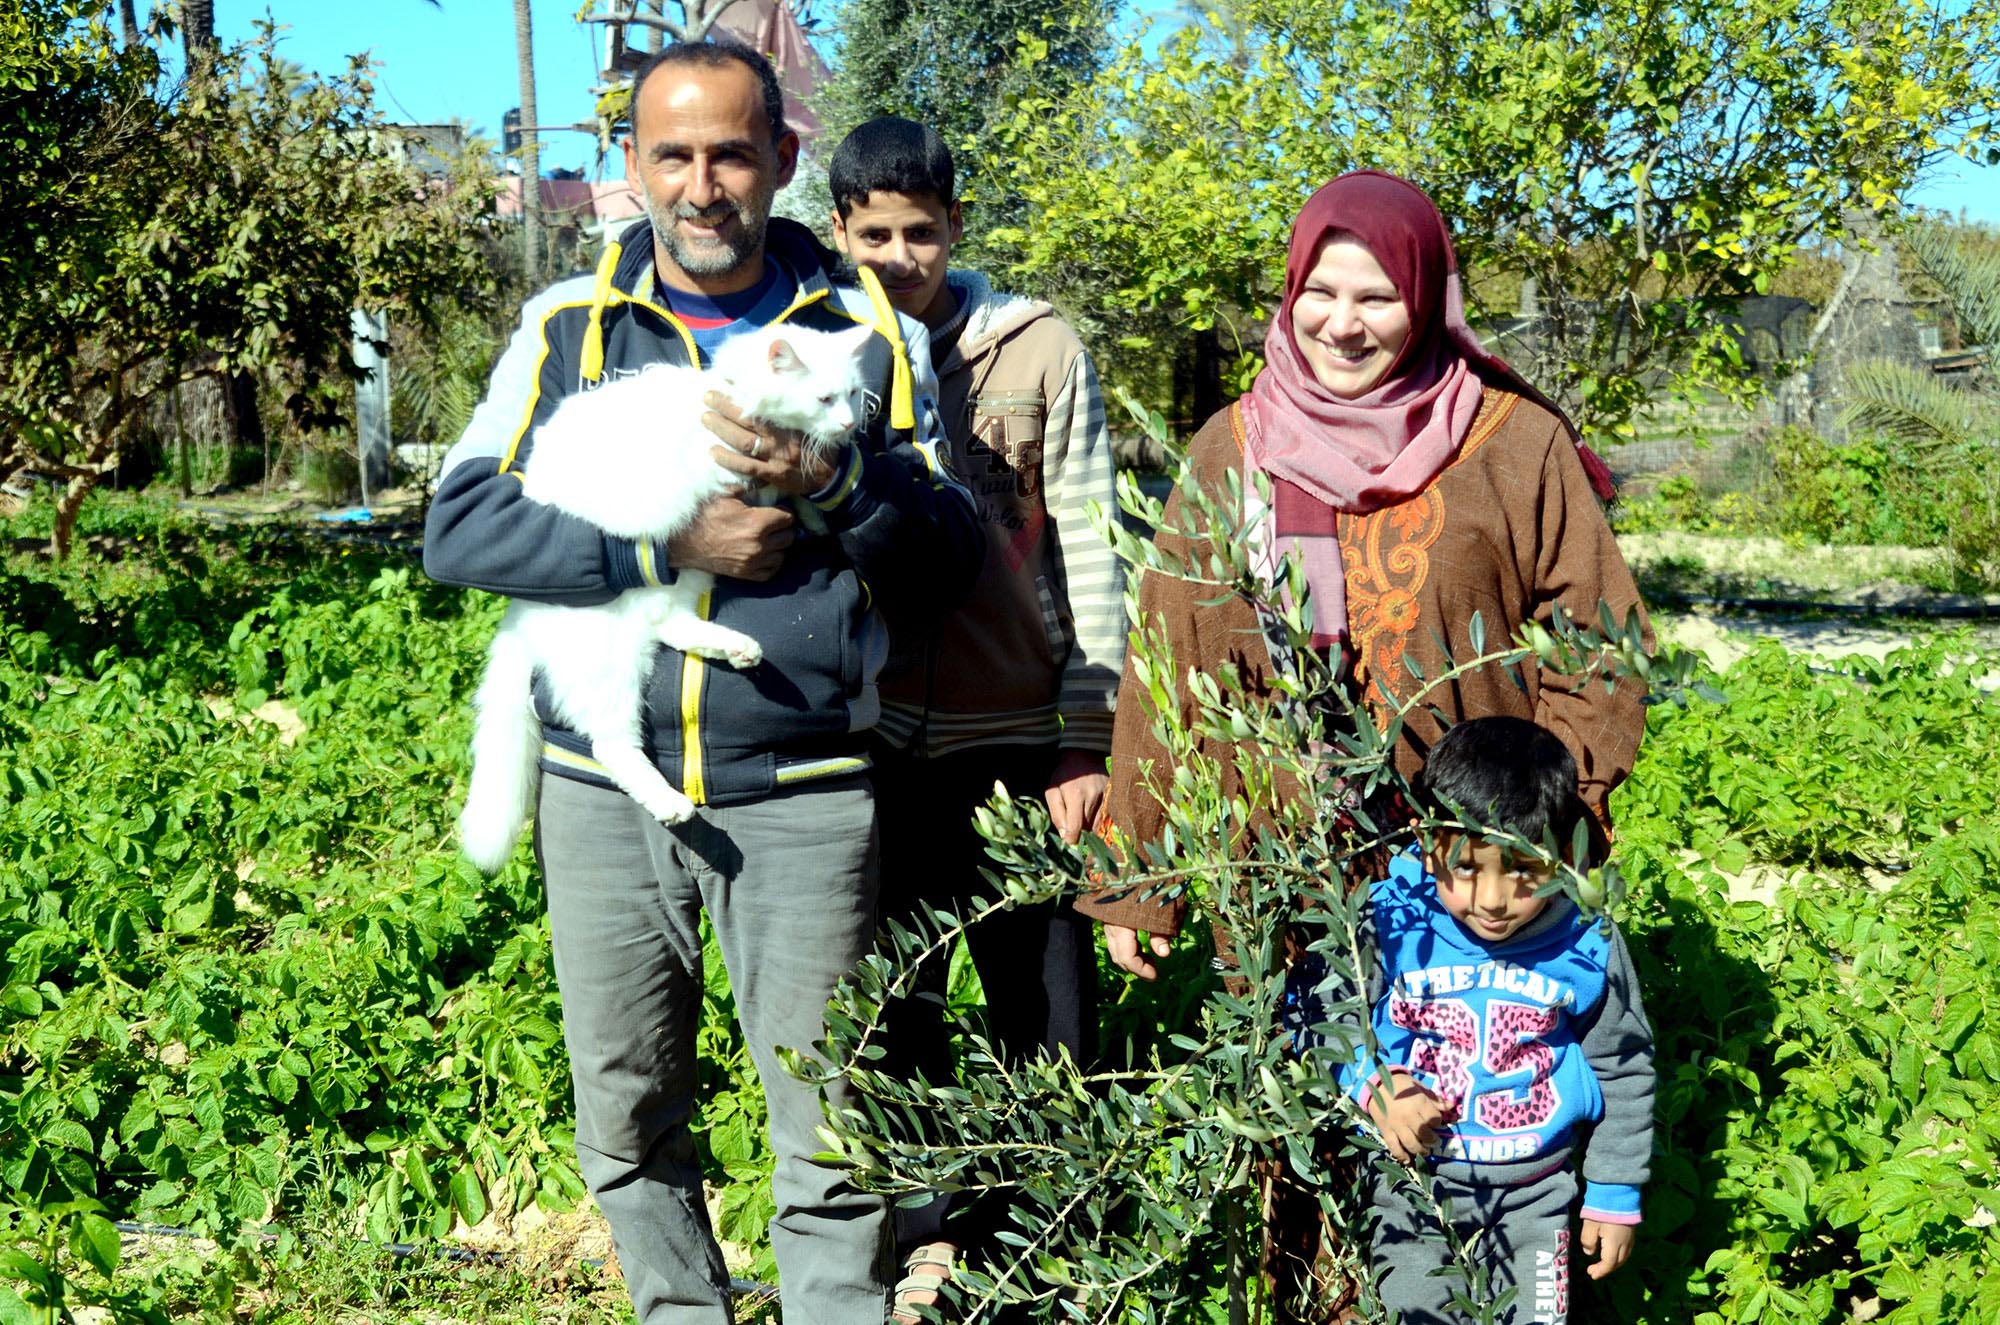 Gaza farmer, Shaban, stands in his potato field with his family.